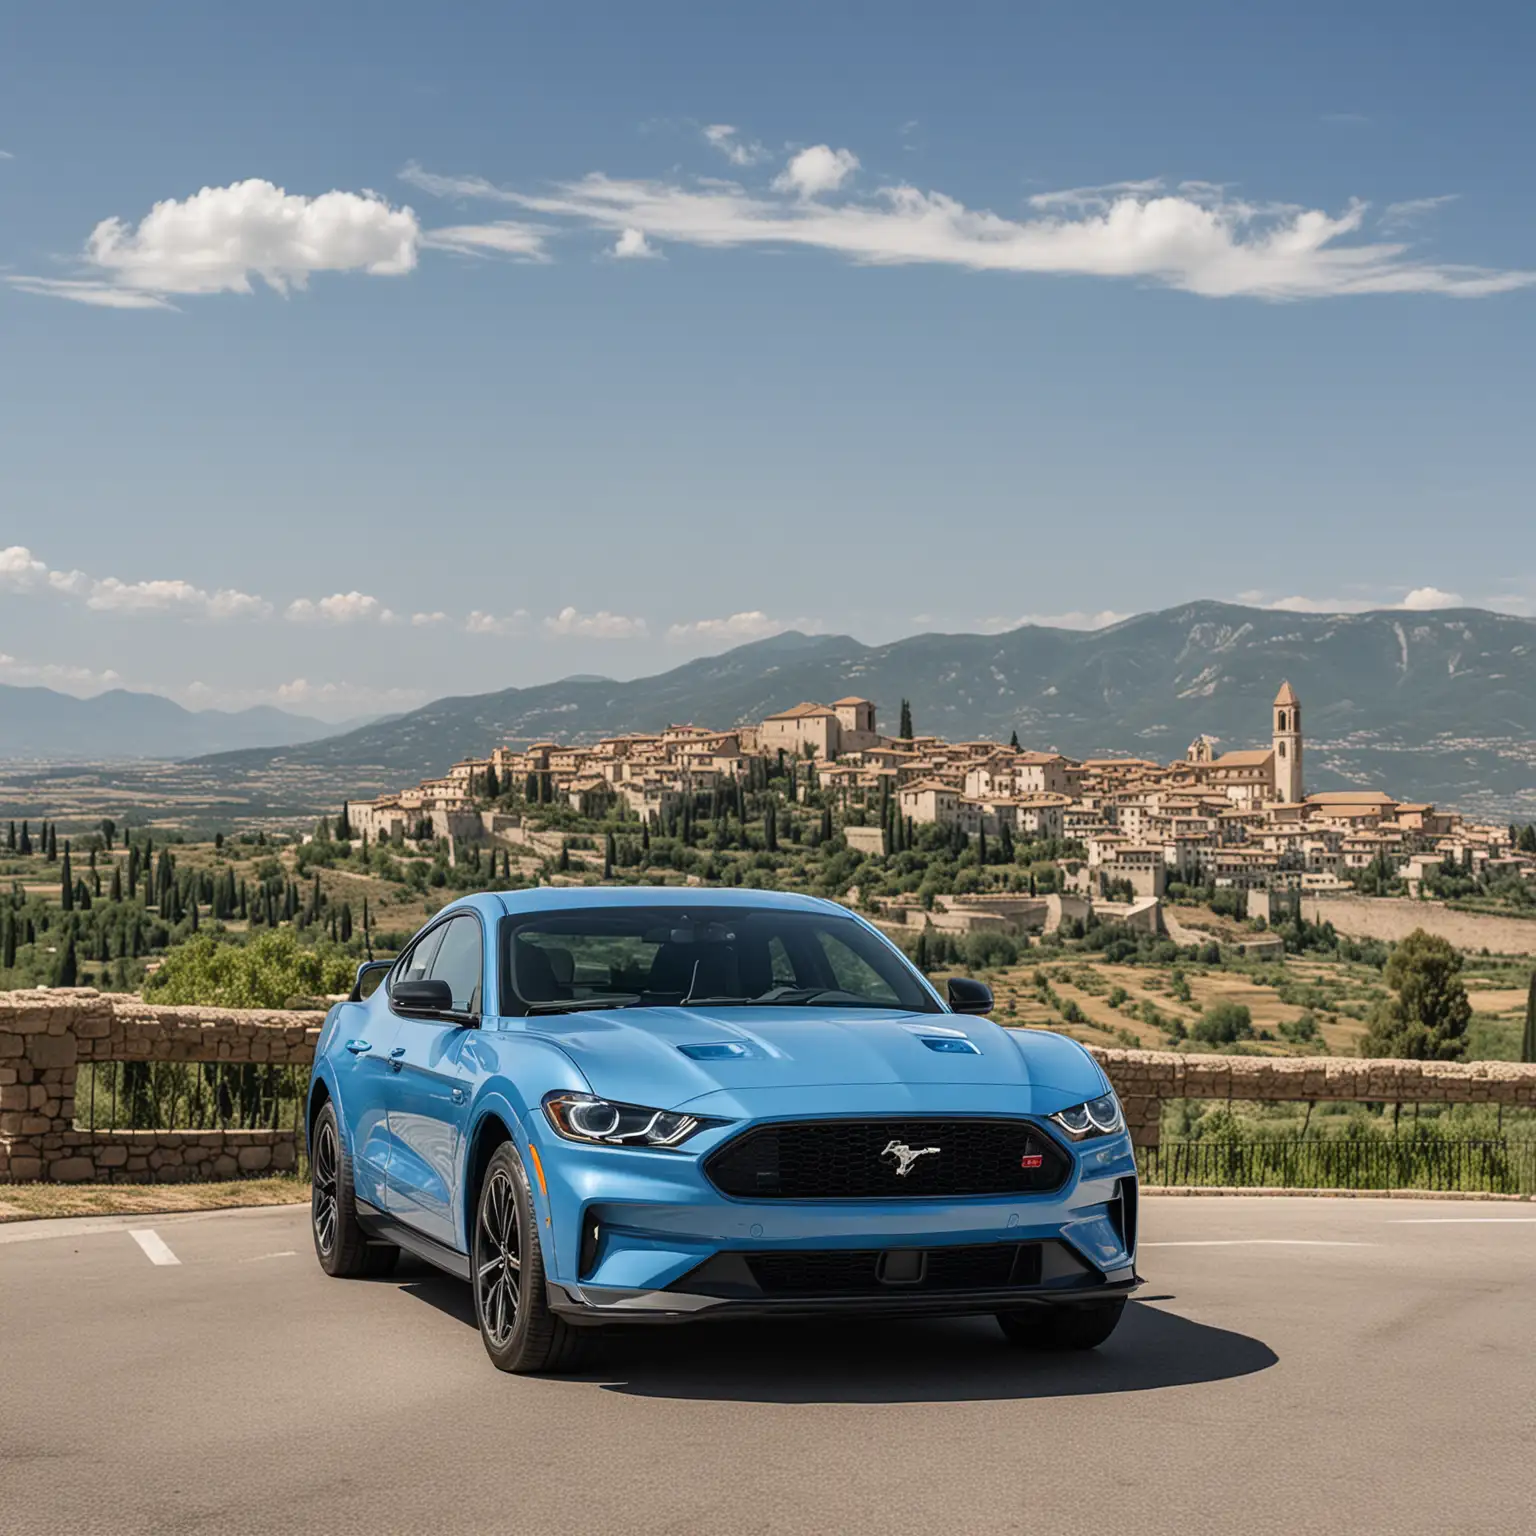 A picture of a car. A ford mustang mach e. The color of the ford mustang mach e is vapor blue. Assisi (umbria) is in the background